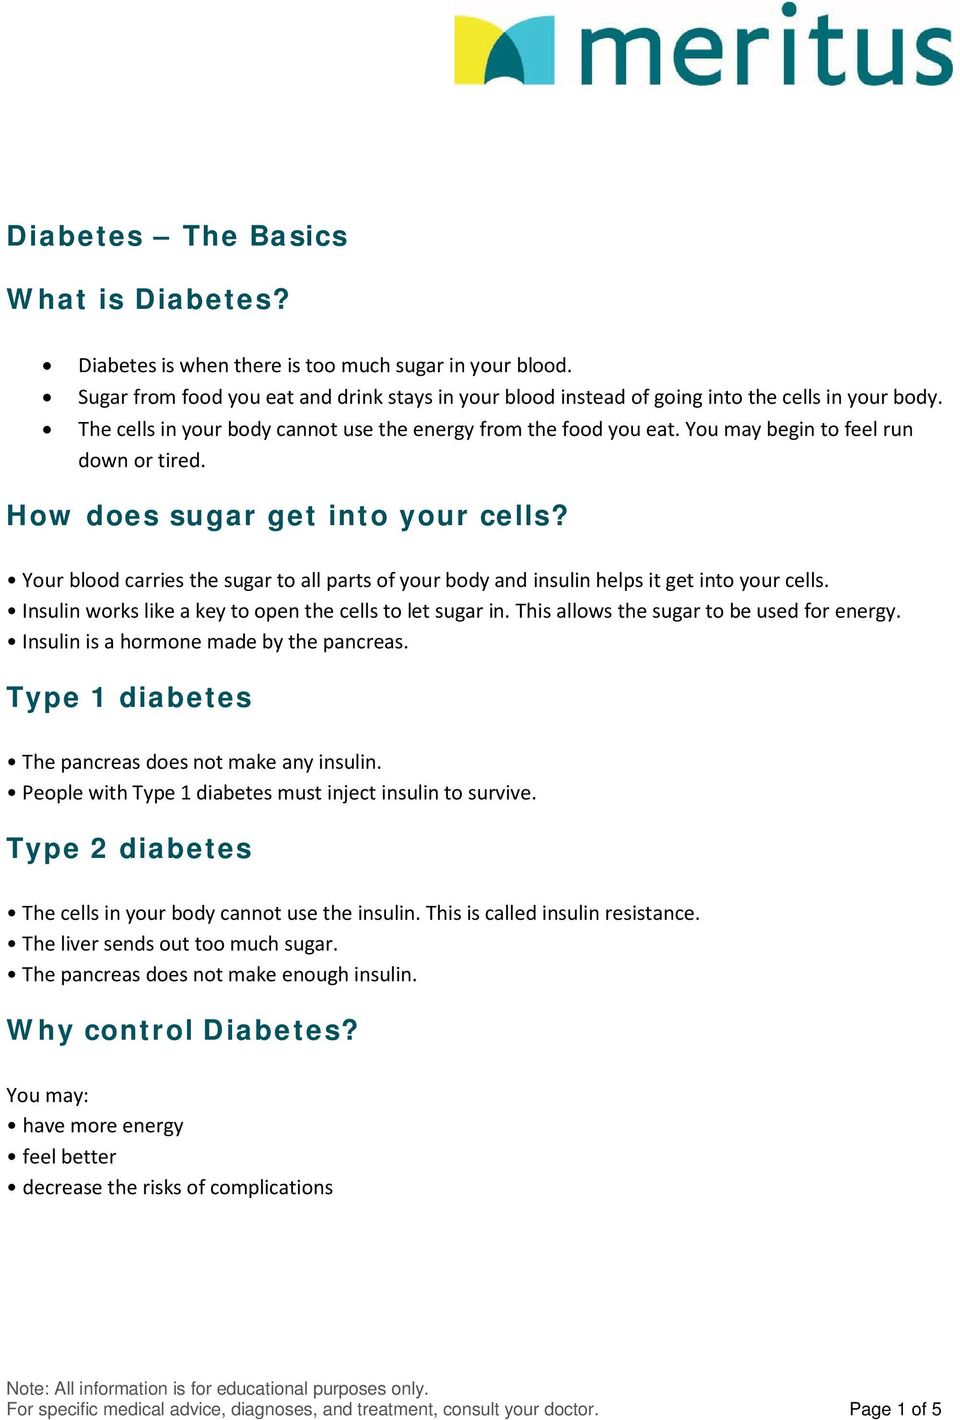 Your blood carries the sugar to all parts of your body and insulin helps it get into your cells. Insulin works like a key to open the cells to let sugar in.